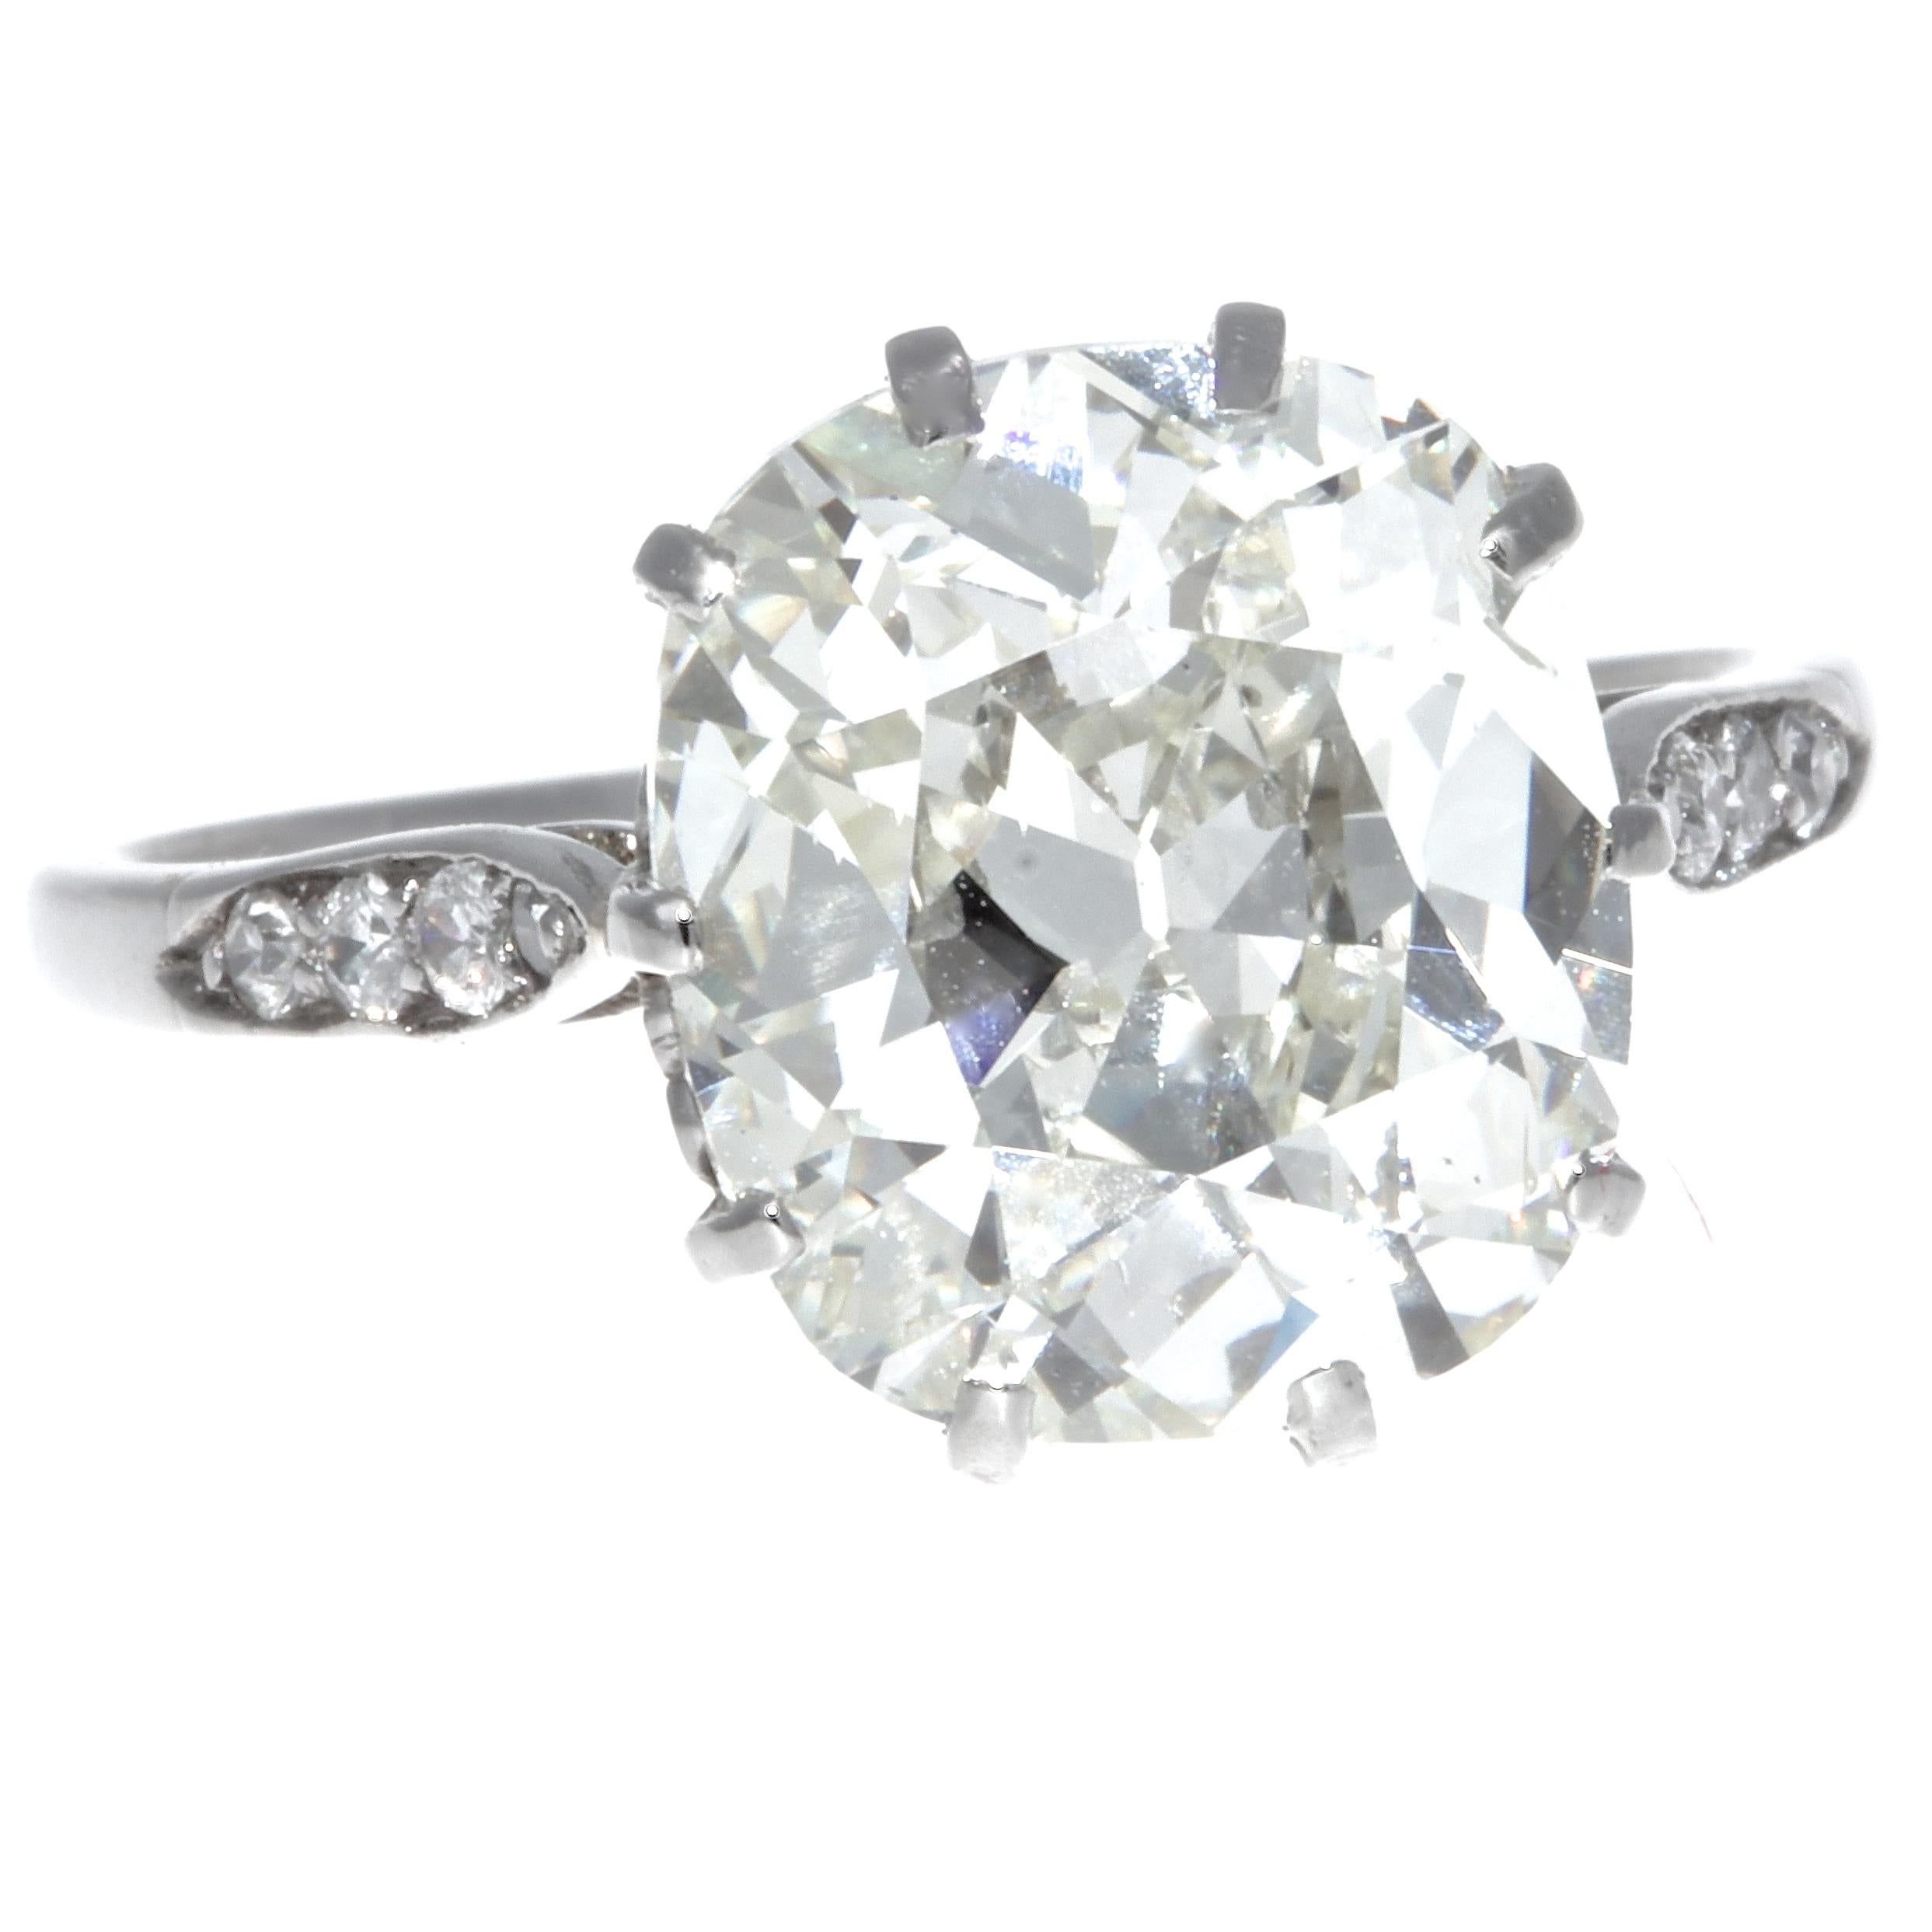 Everyone is on the hunt for these diamonds. Large carat antique cushion cut diamonds are extremely hard to find these days! We found one of the the most beautiful; a GIA certified 5.02 carat, K color, SI1 clarity. (#6214181861). Accented by eight